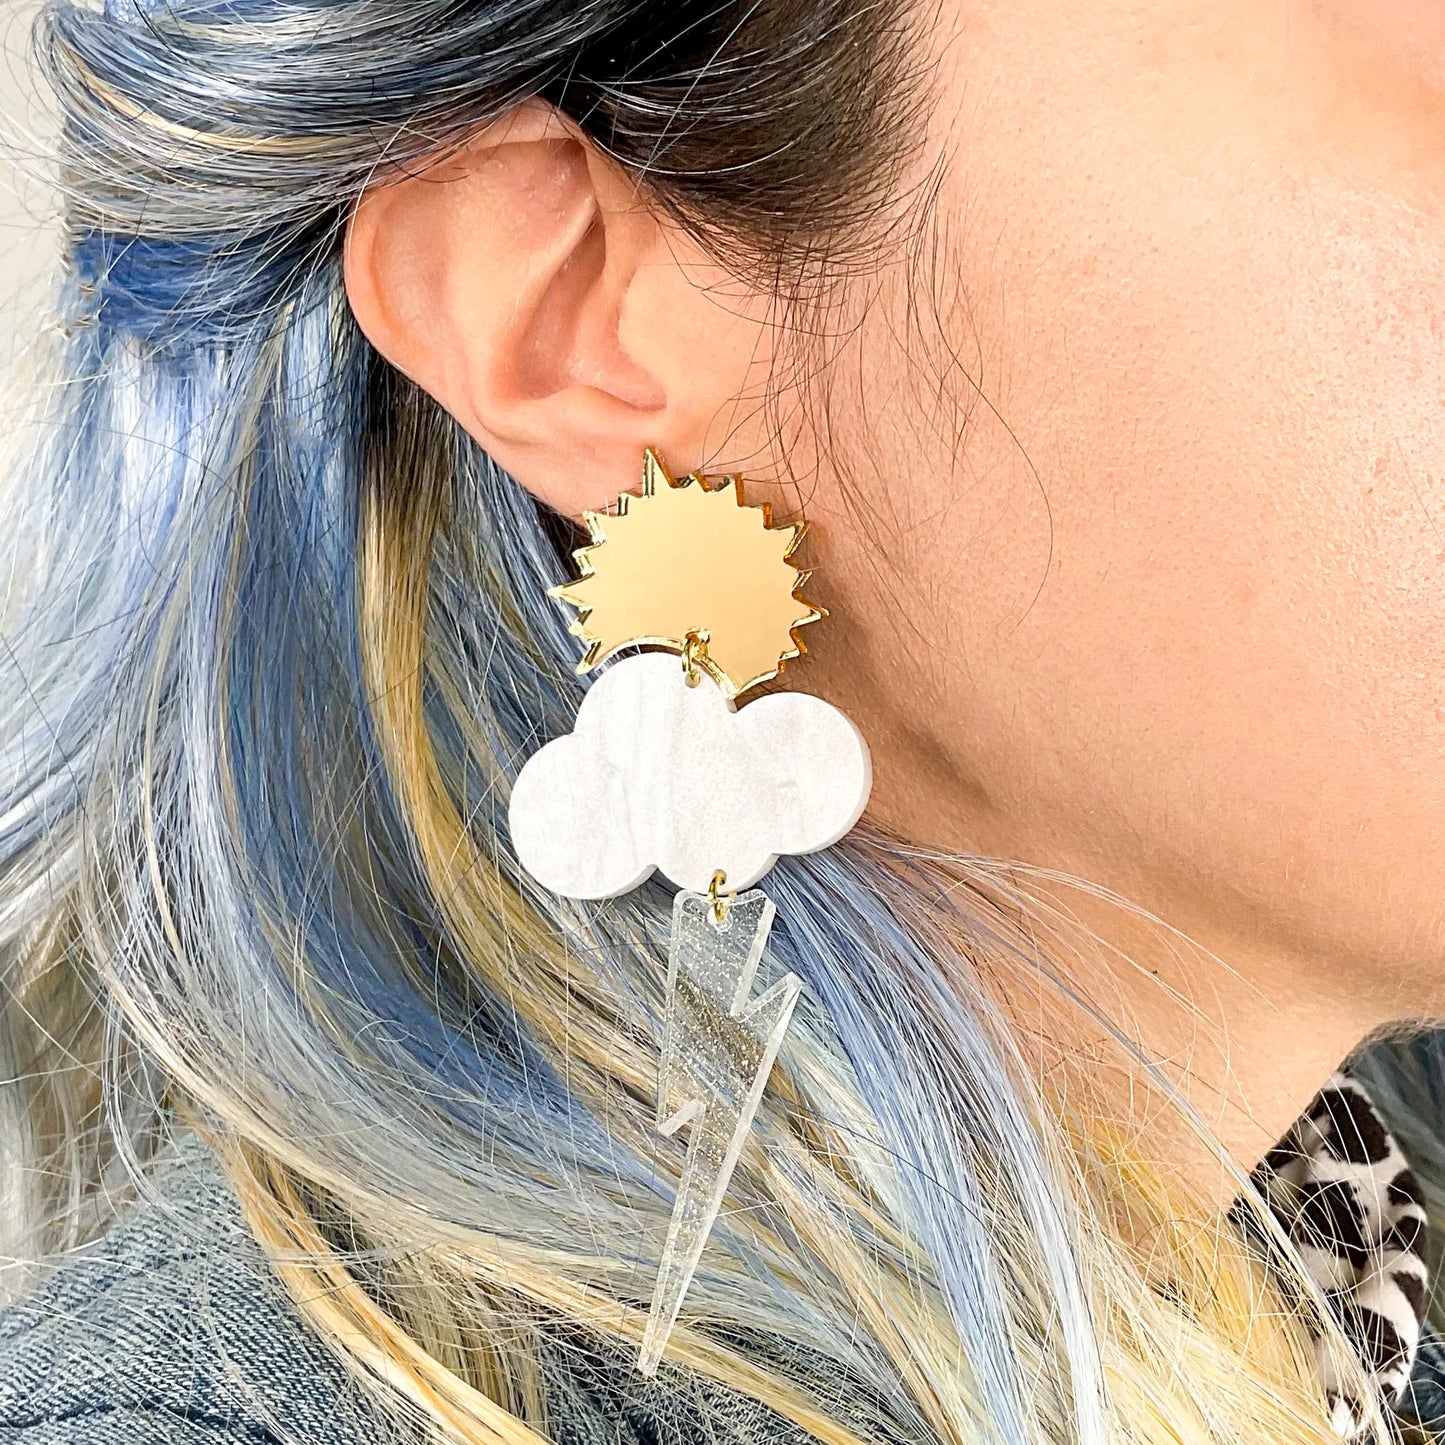 Partly Cloudy Chance of Shimmer Earrings